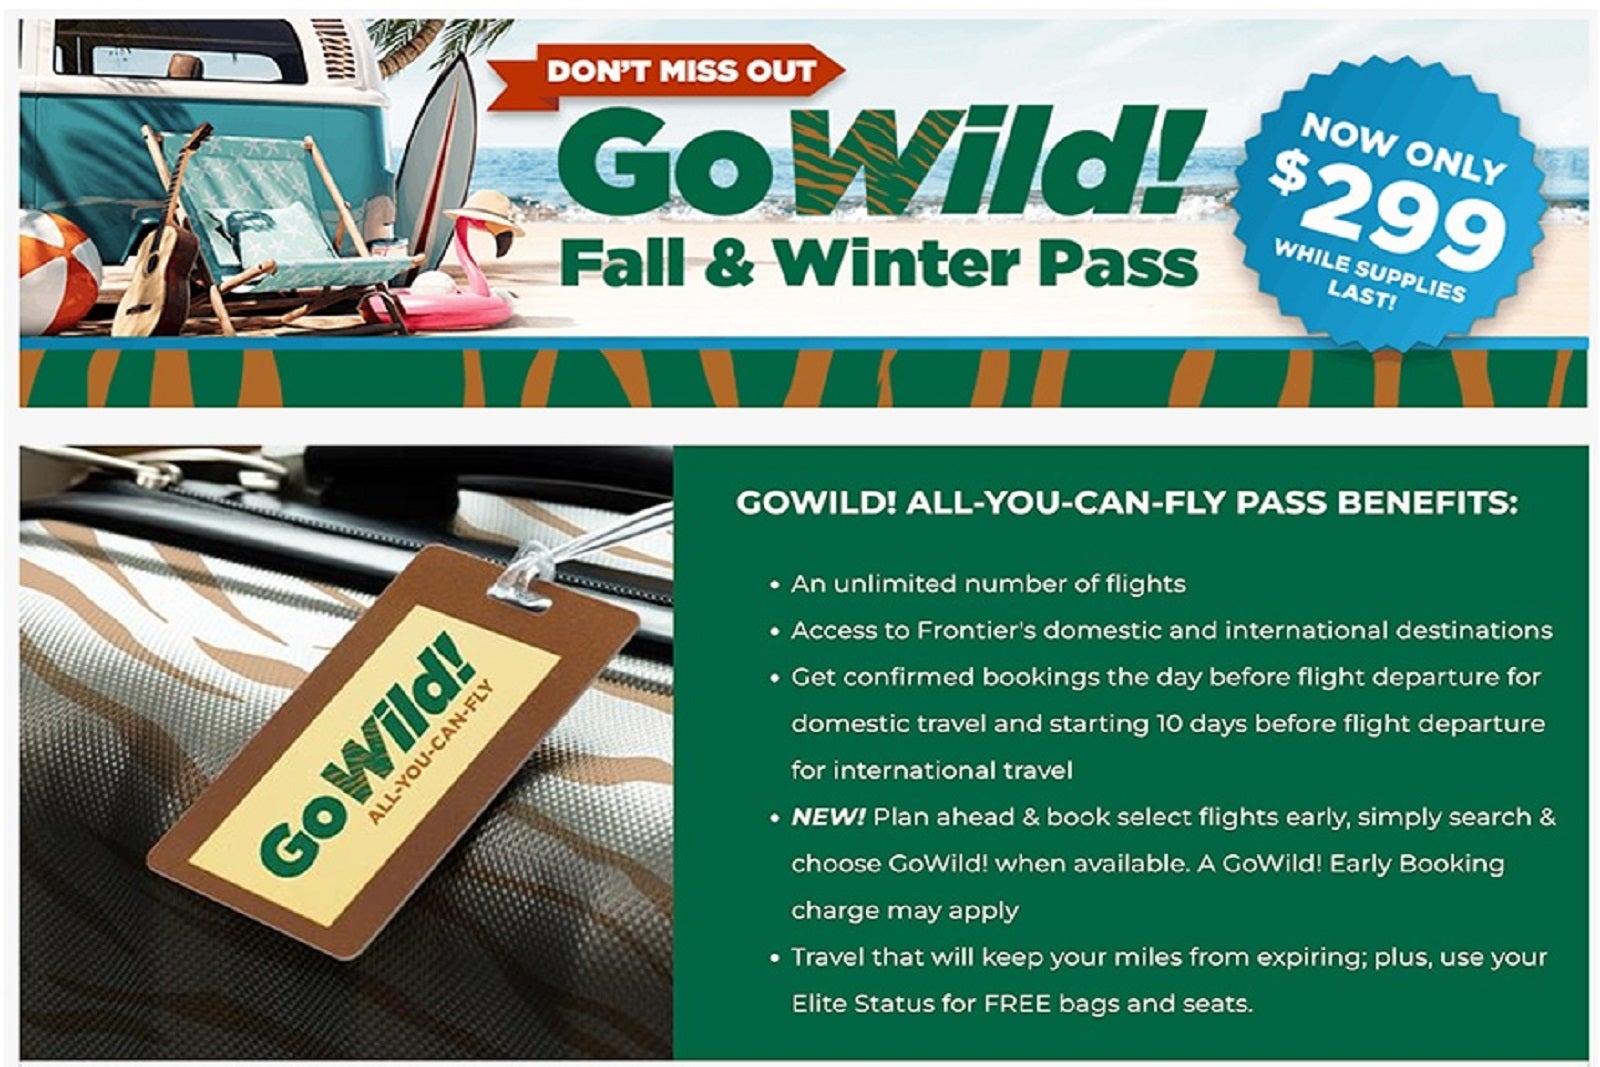 An ad attempting to convince applicants to purchase a GoWild! Pass during the application process